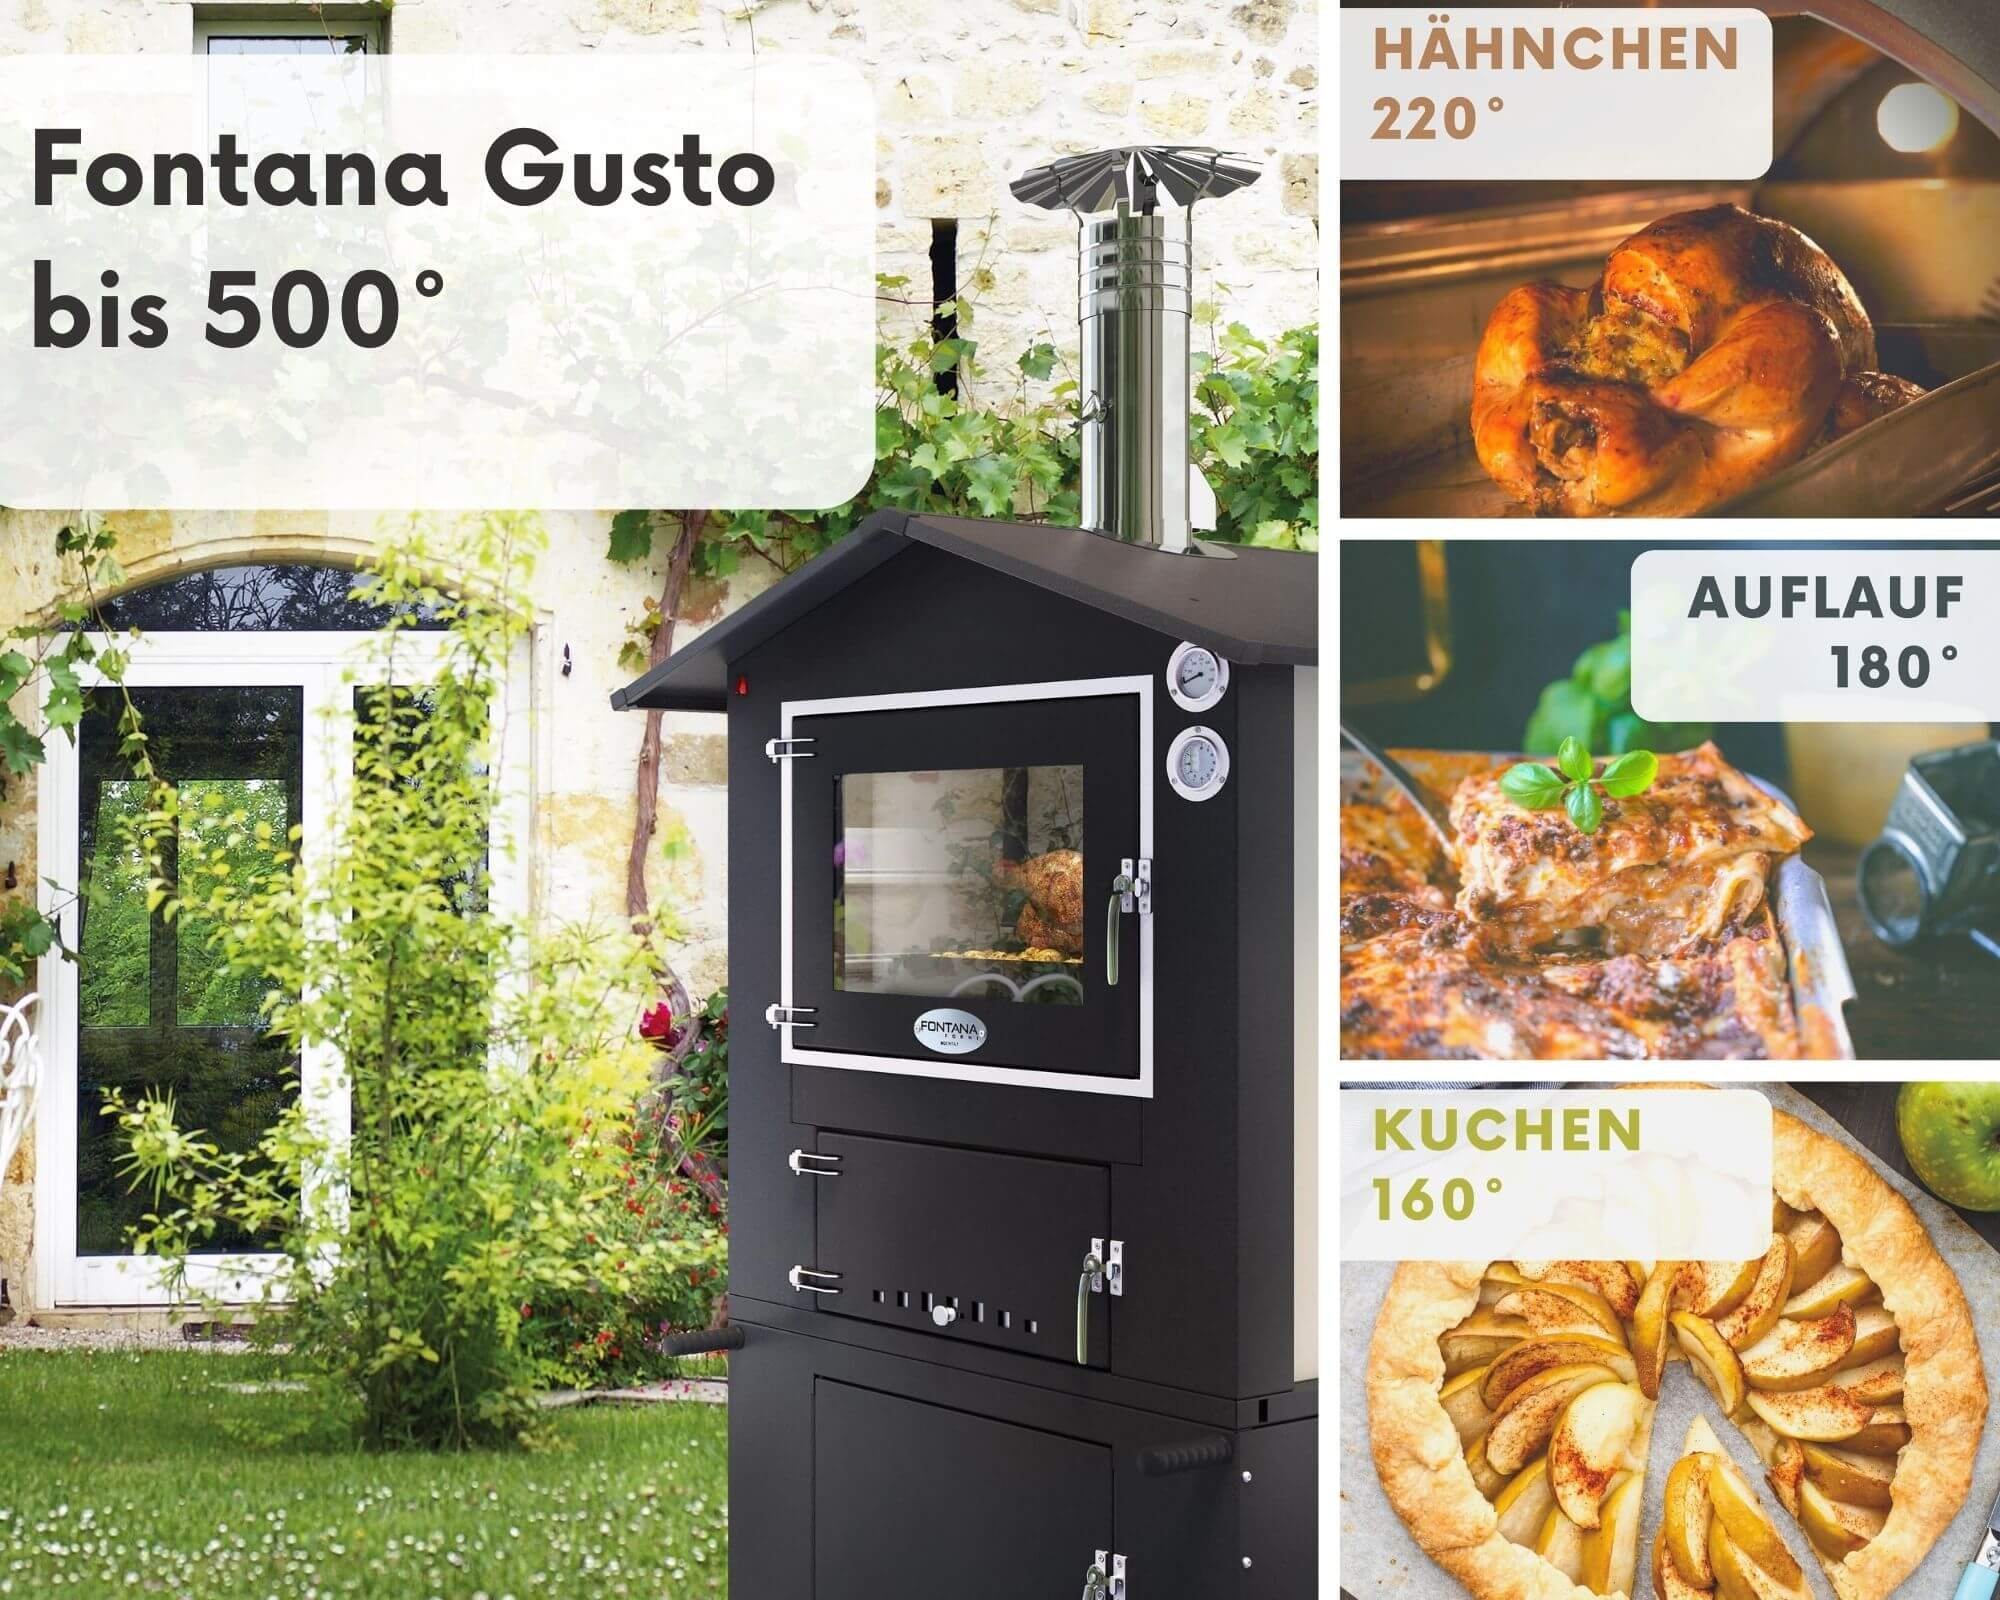 Bakehouse Fontana Gusto made of weatherproof stainless steel, indirect firing, three baking levels of 80x54cm each.